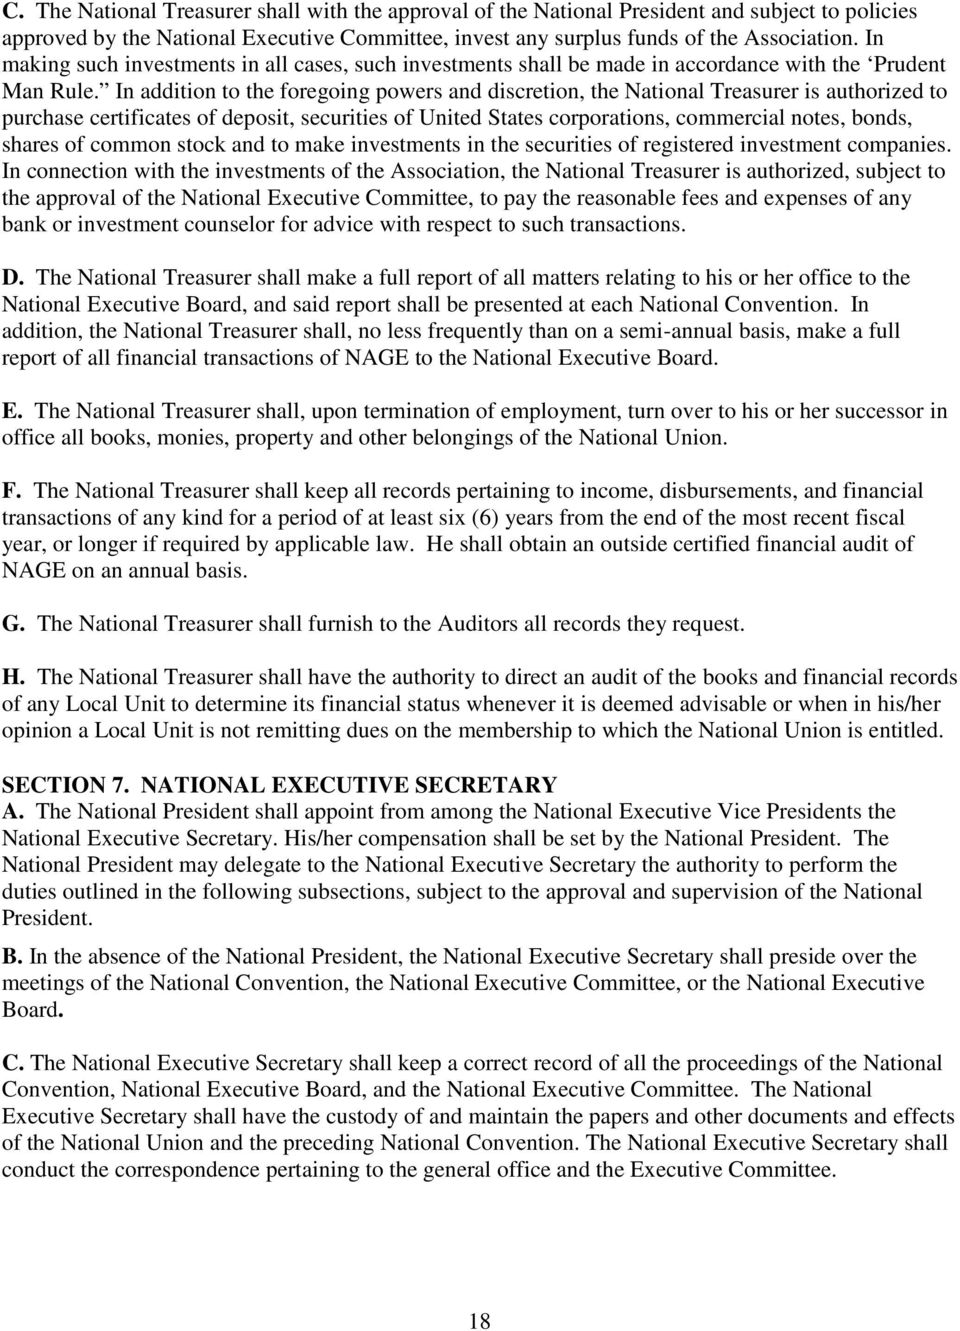 In addition to the foregoing powers and discretion, the National Treasurer is authorized to purchase certificates of deposit, securities of United States corporations, commercial notes, bonds, shares